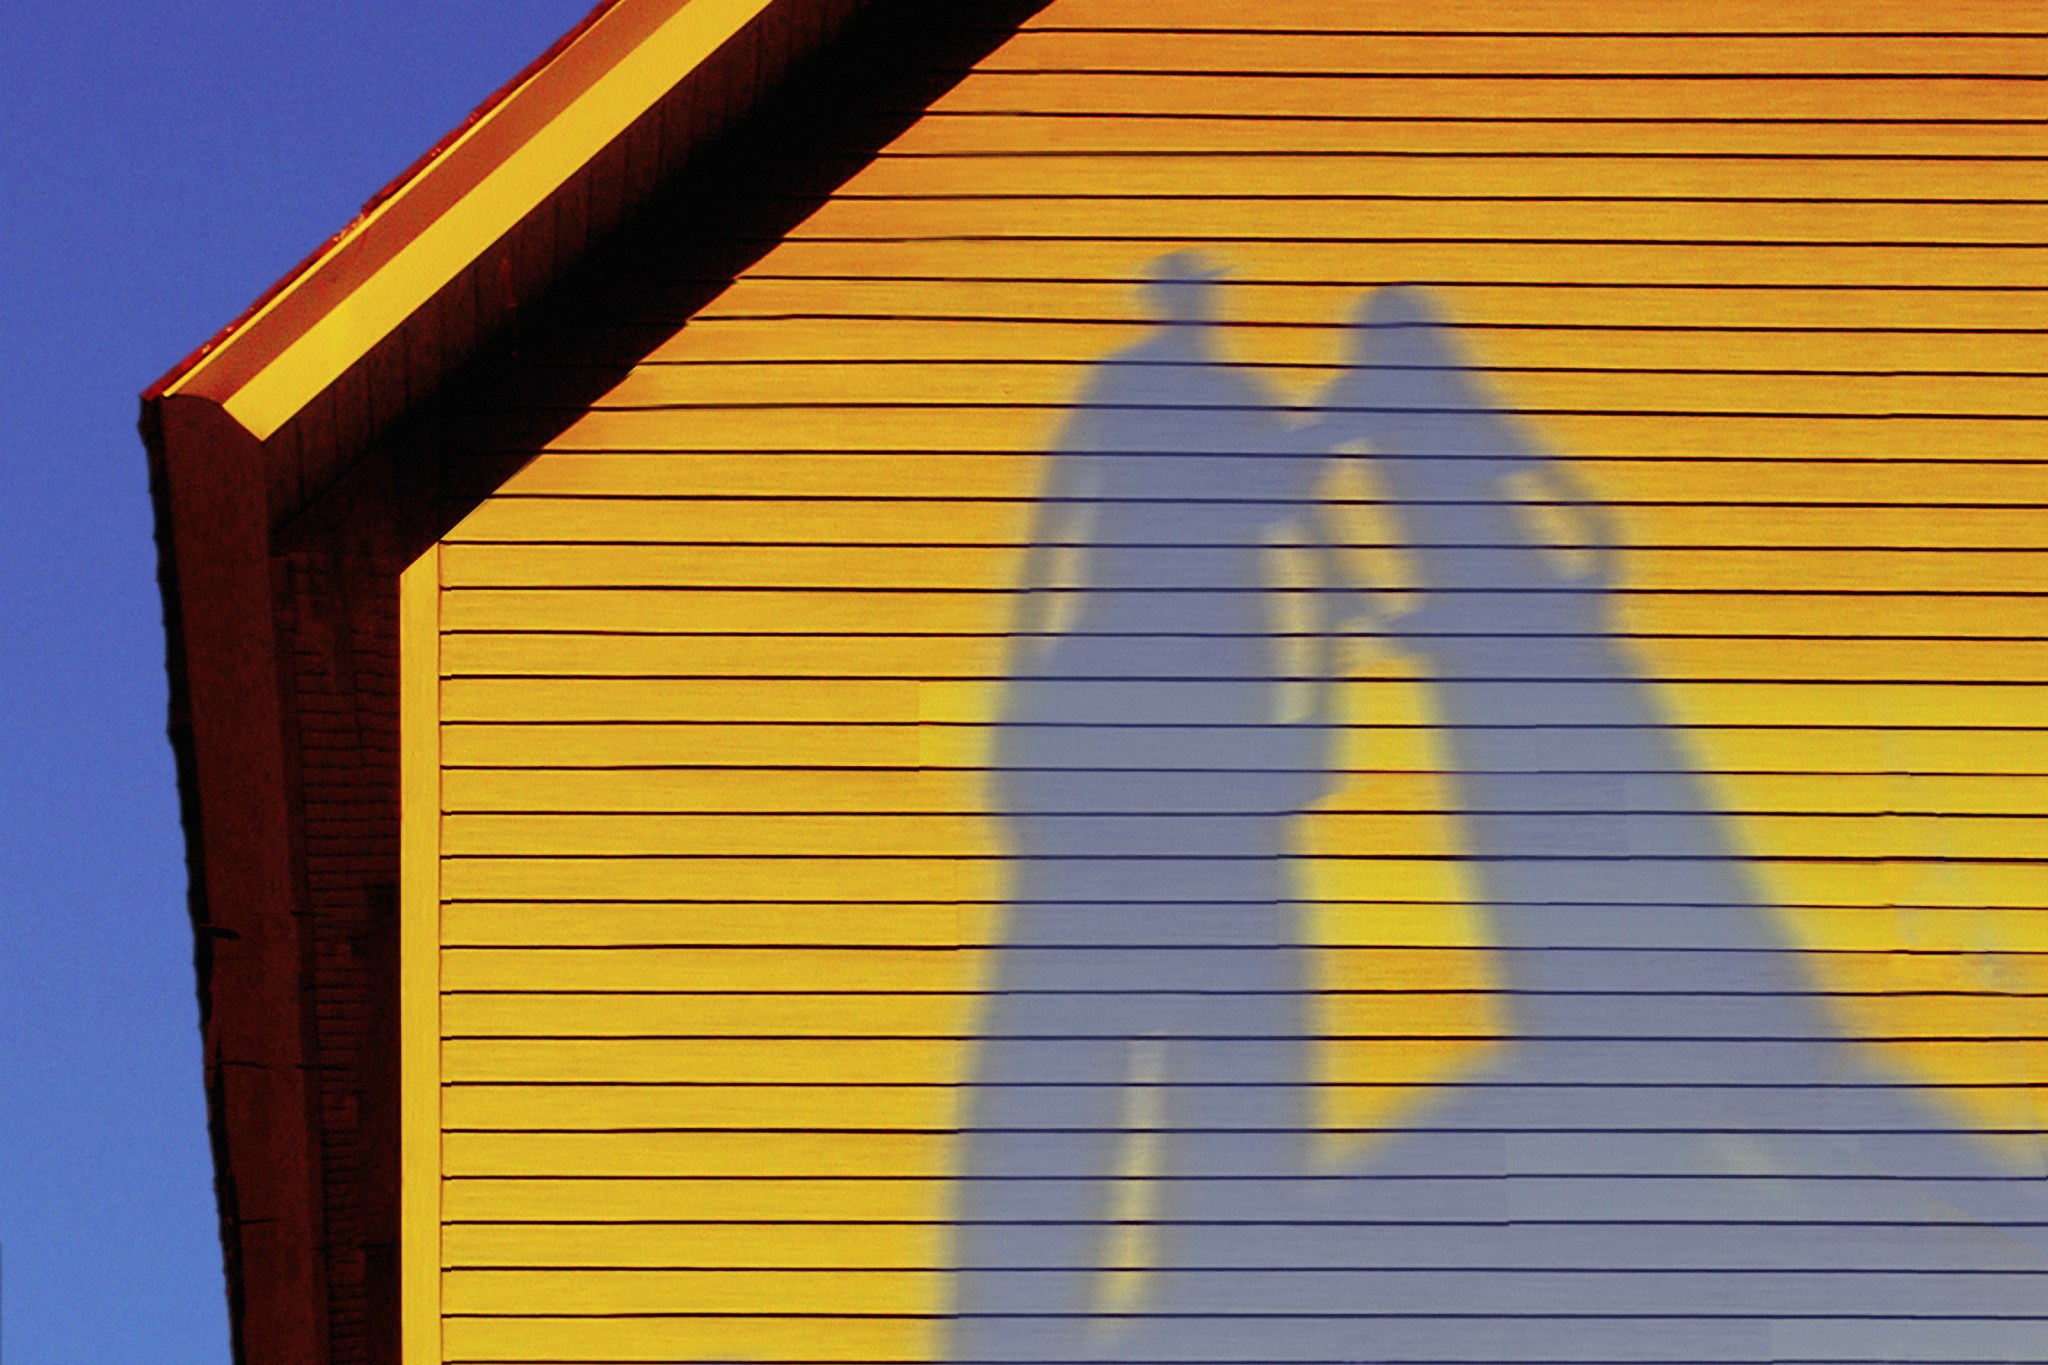 Shadows of two people on the clean yellow siding of a home with a bright blue sky in the background